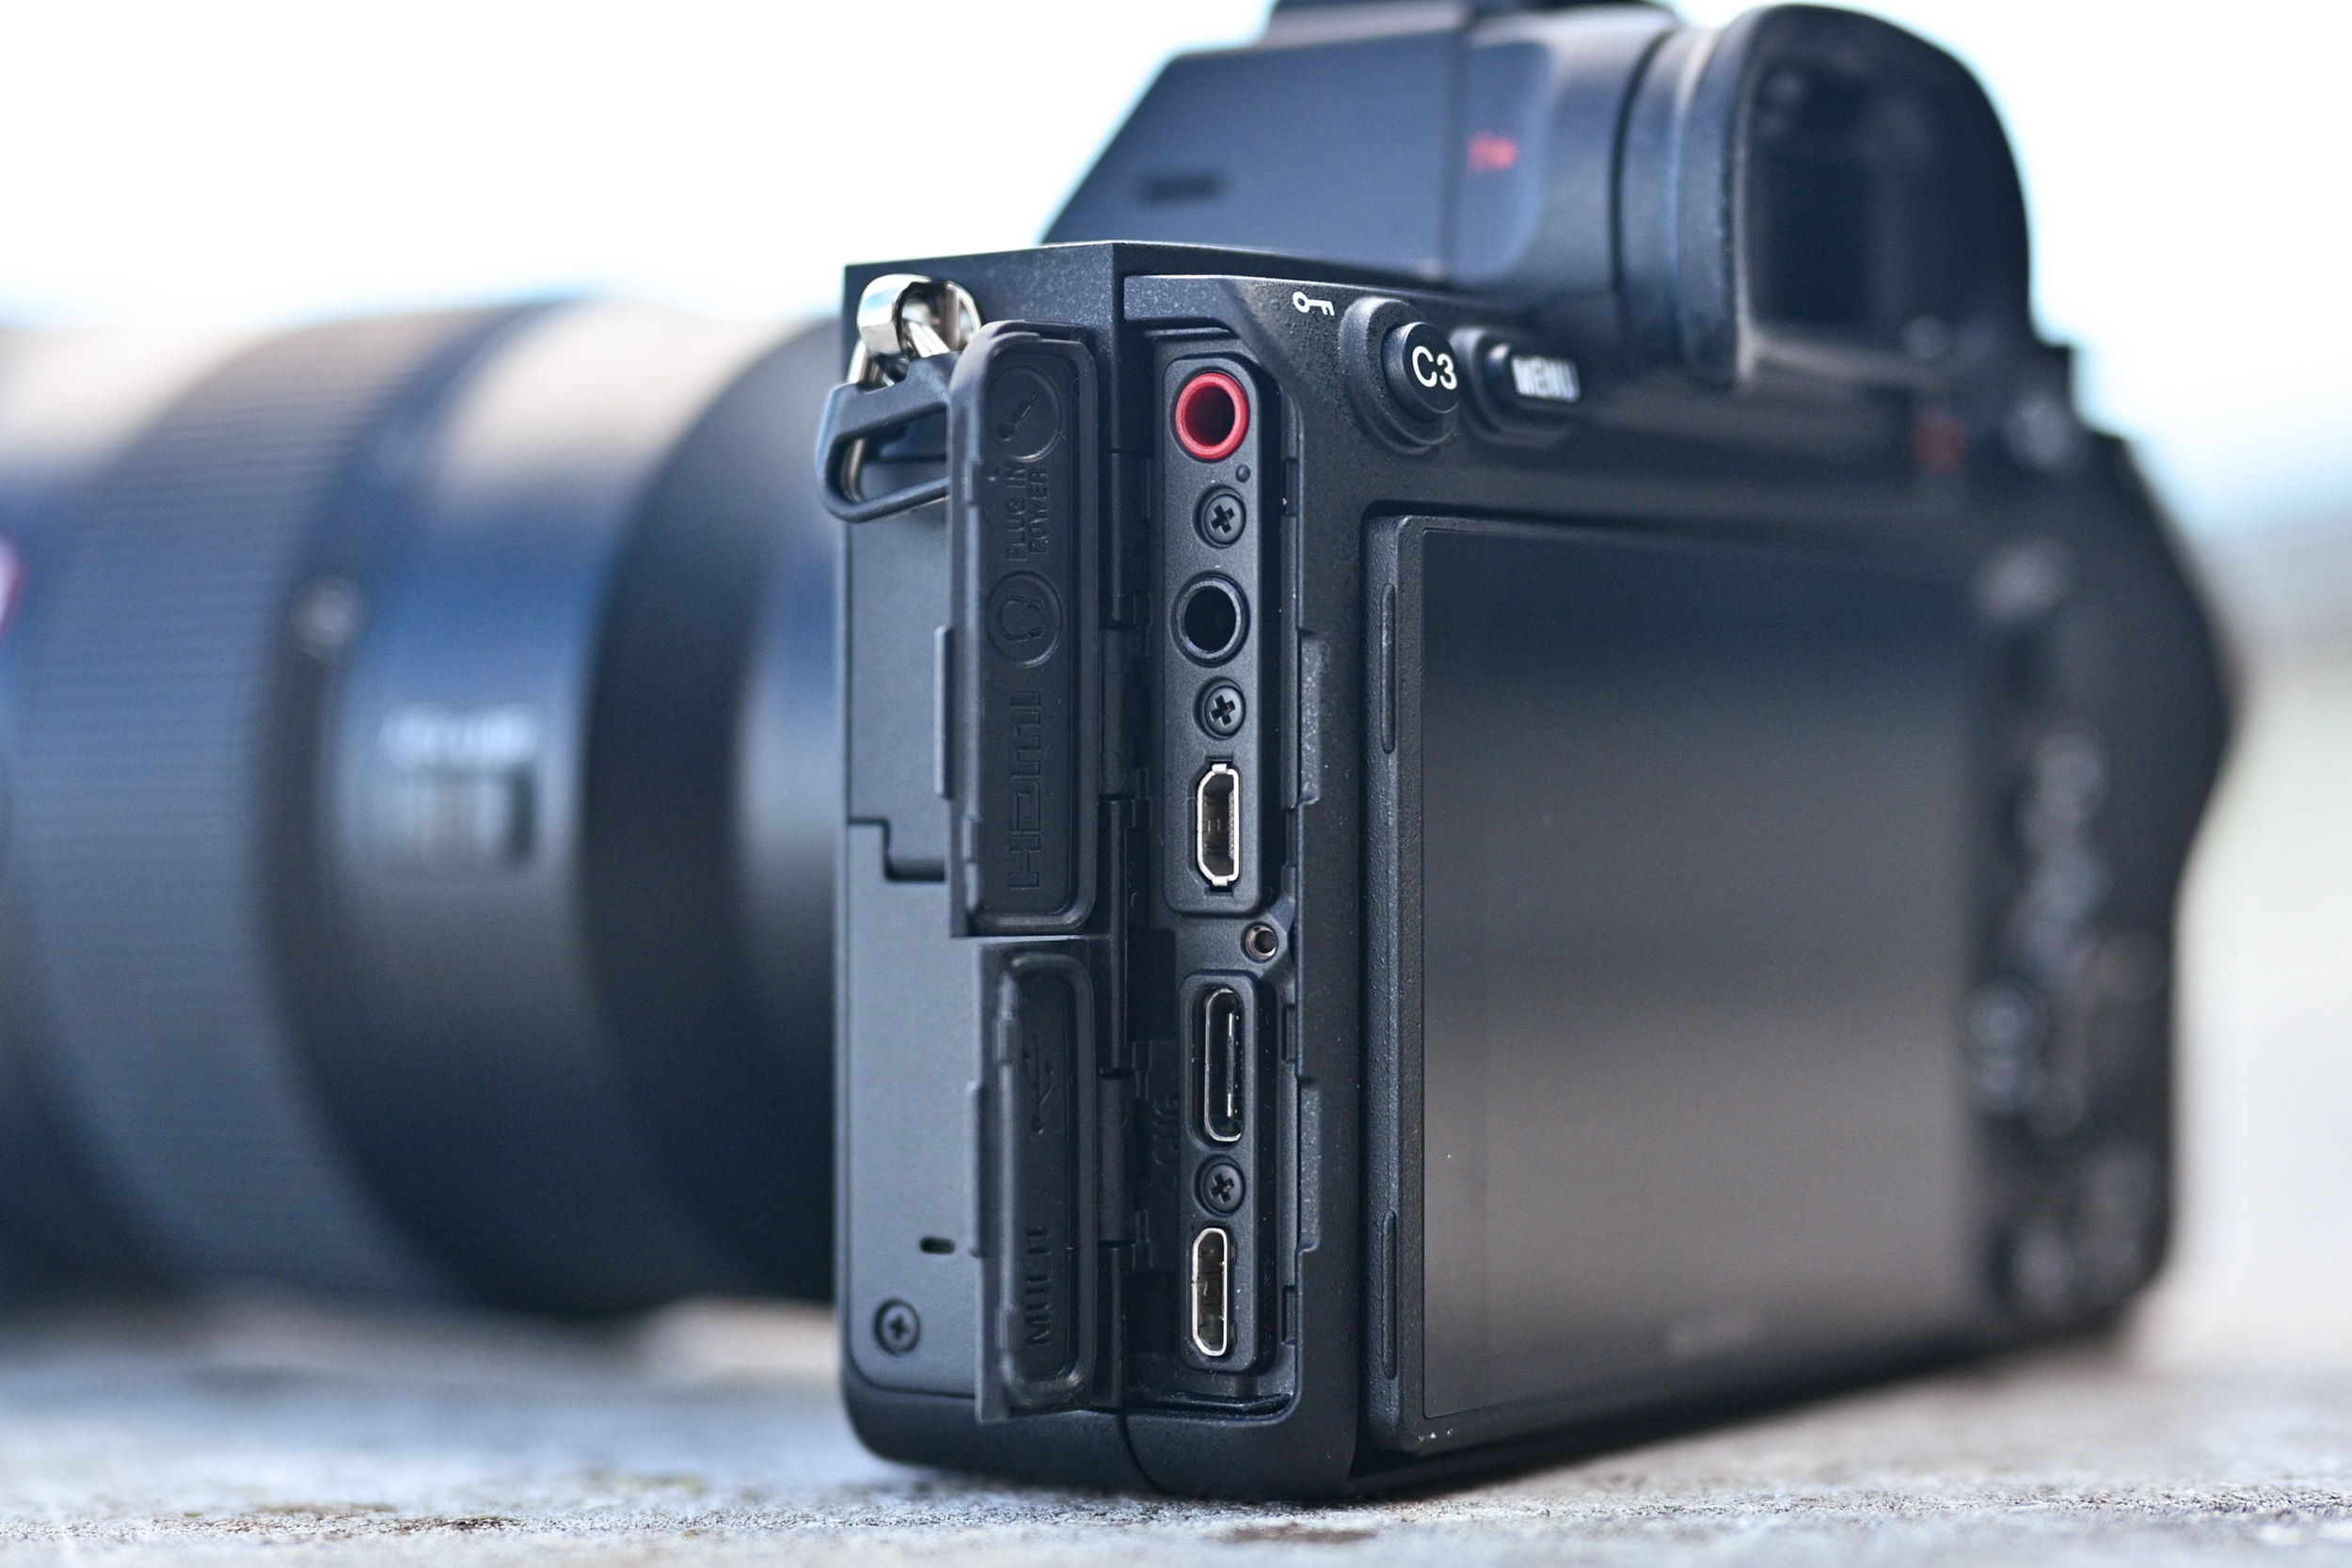 The card slots of the Sony A7R IV camera